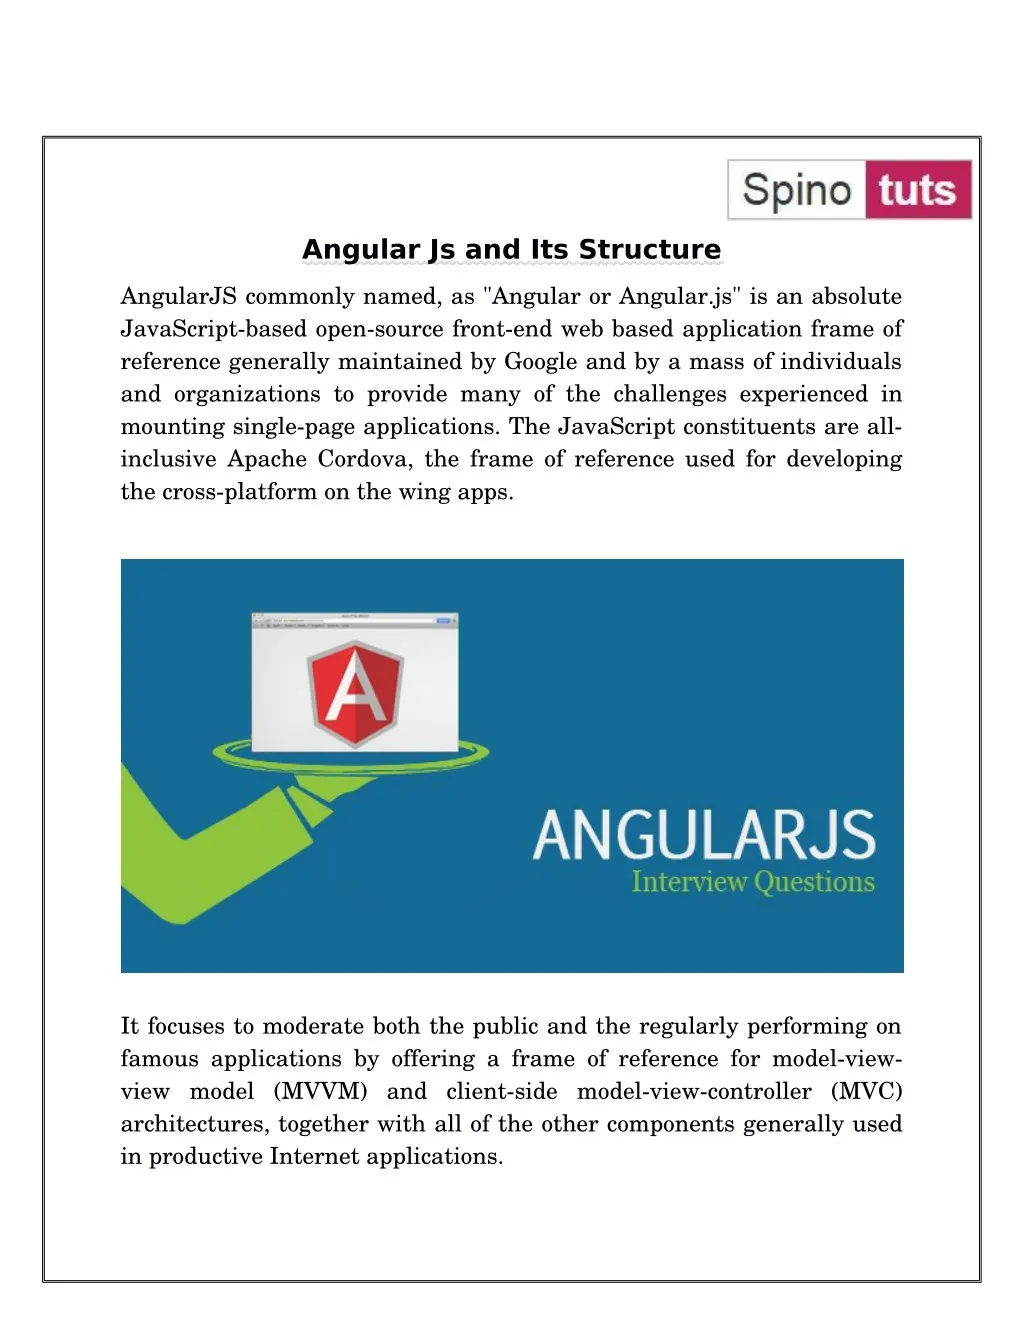 angular js and its structure